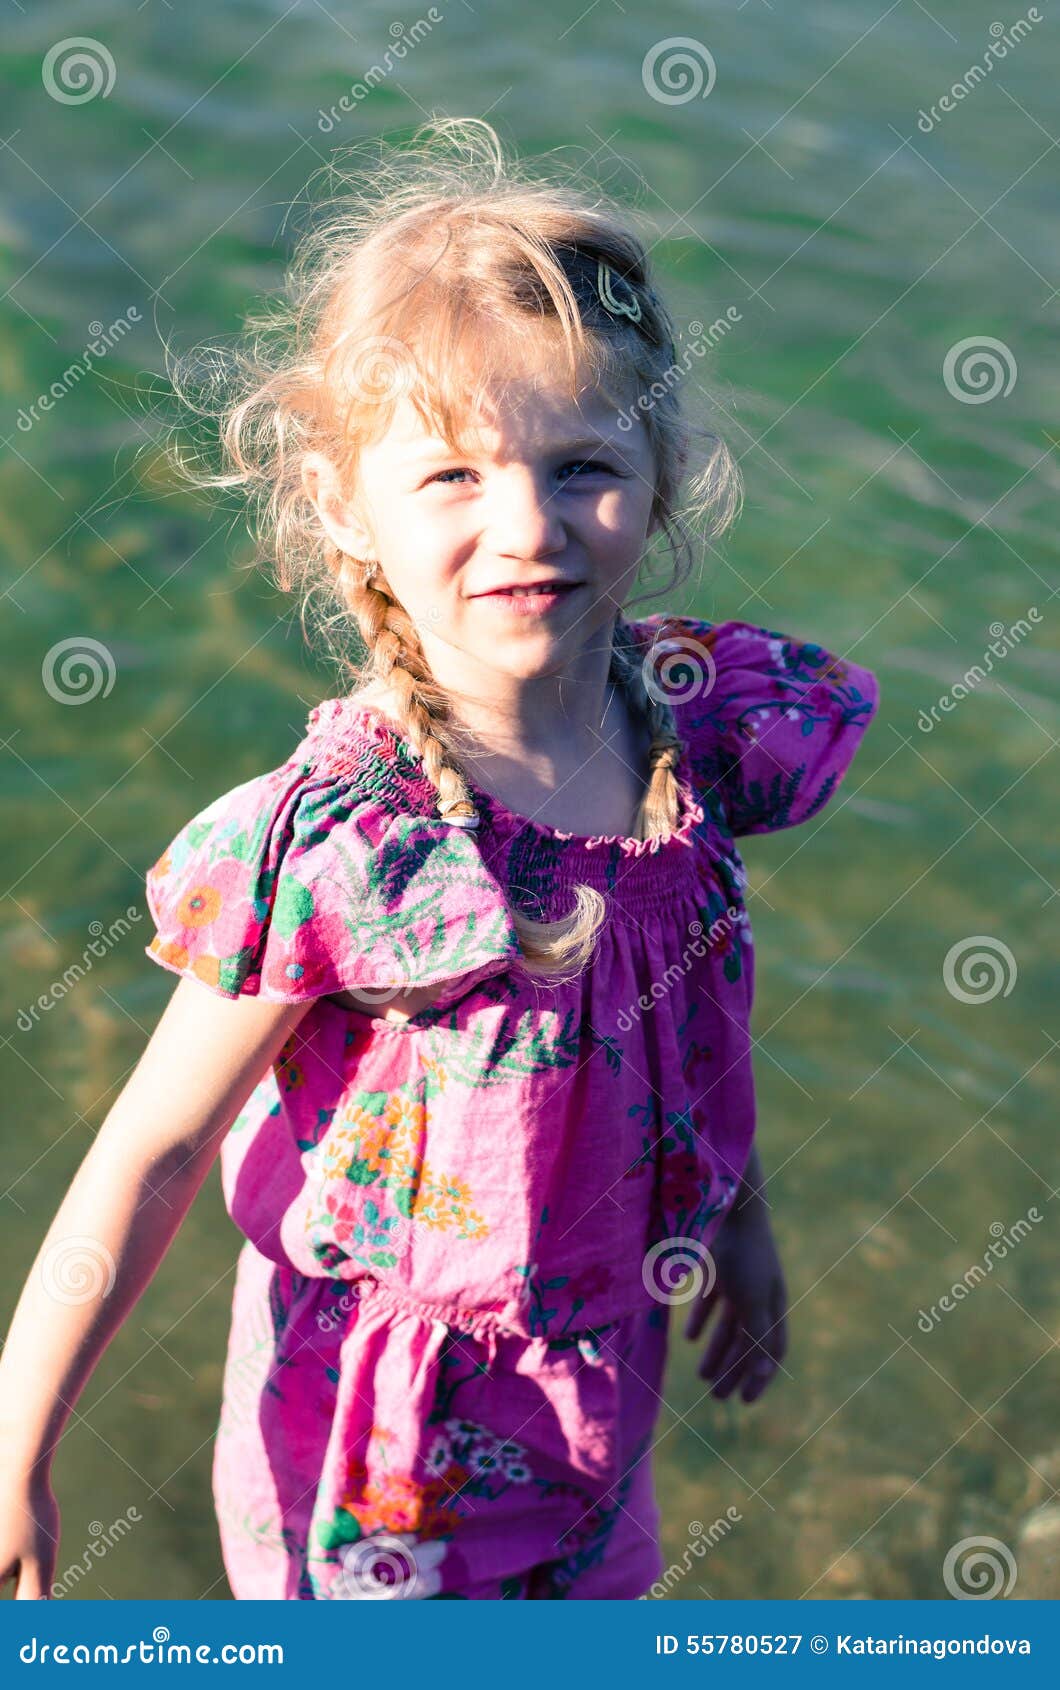 Little Girl with Foot in Water Stock Image - Image of fresh, blue: 55780527